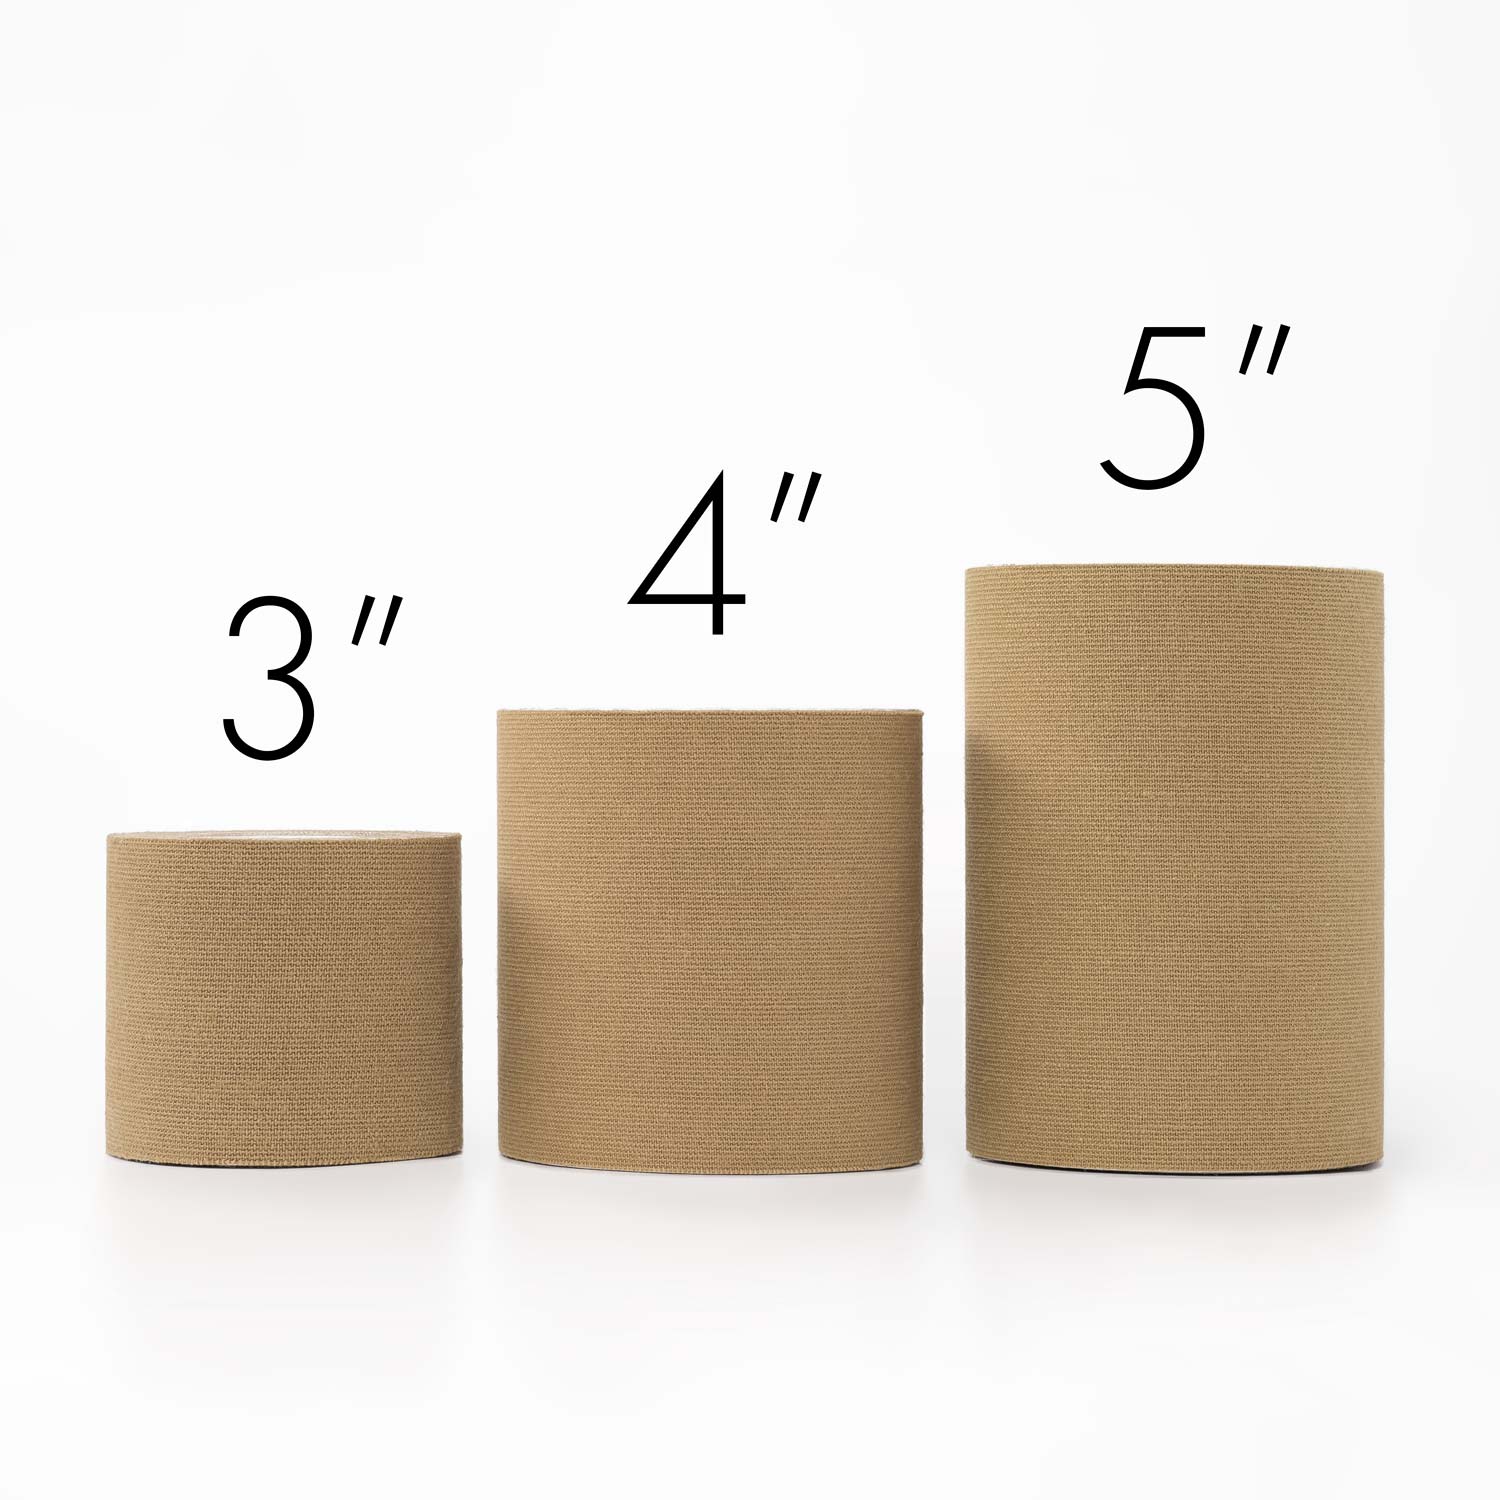 3 sizes of chest binding tape